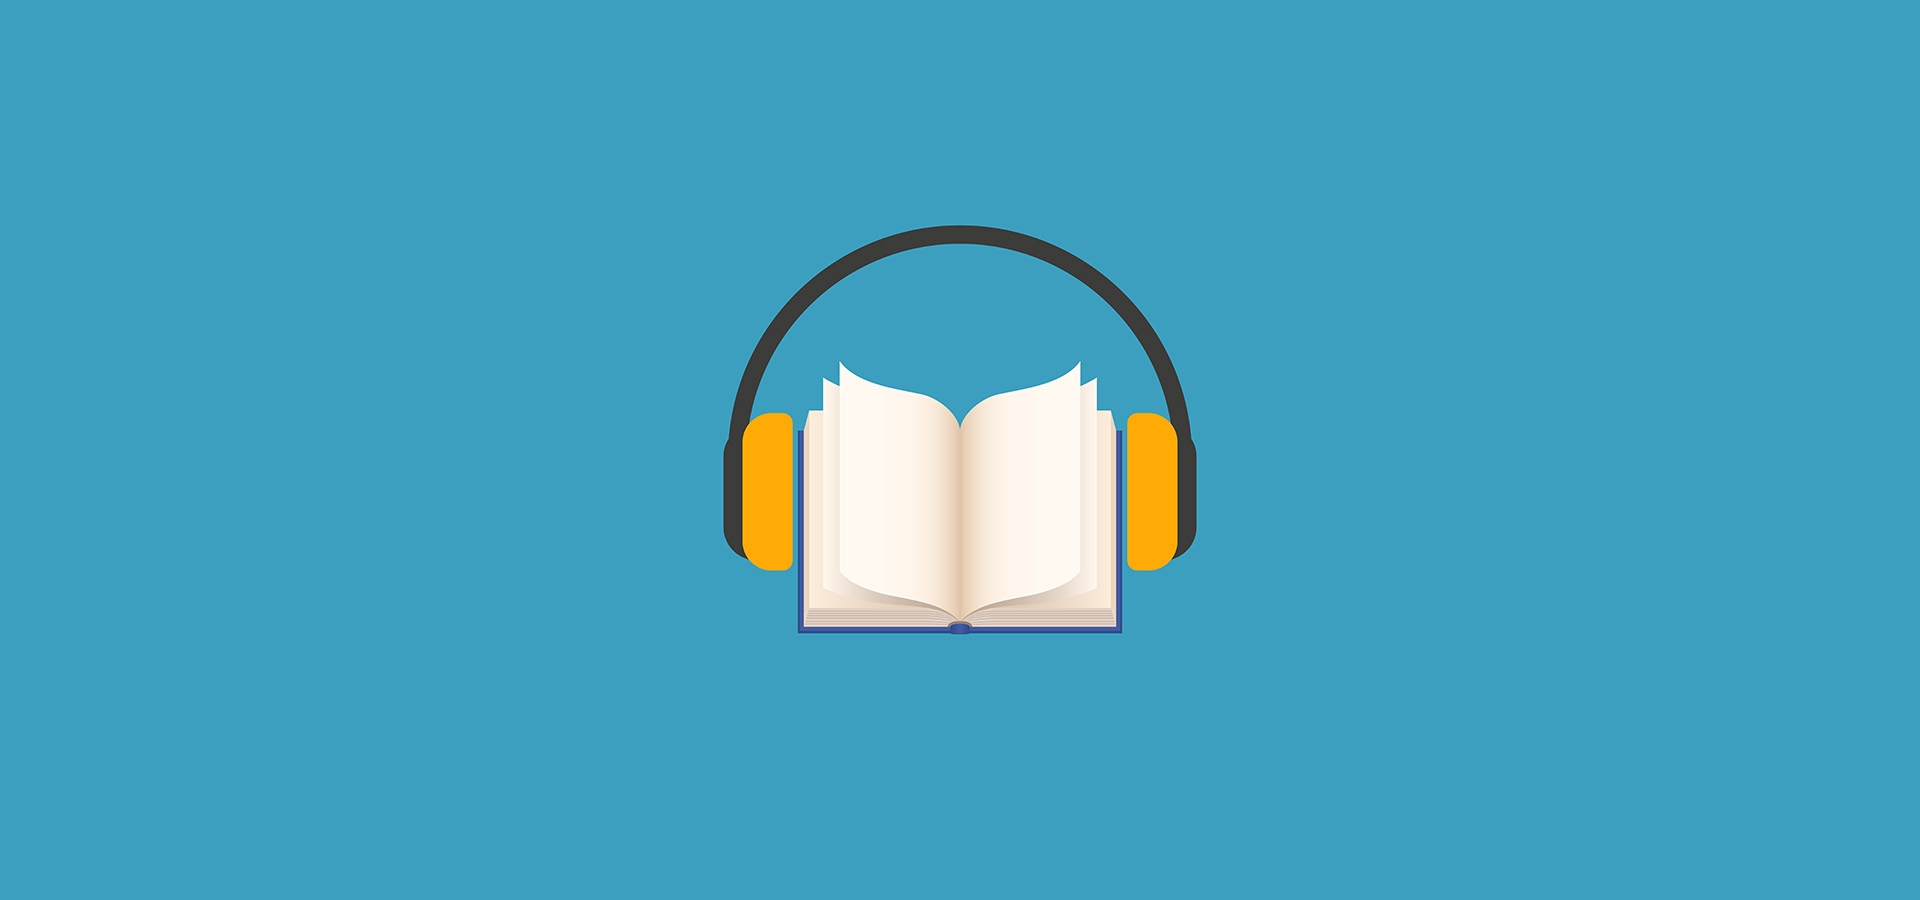 10 Audiobooks for Businesspeople Who Don’t Have Time To Read